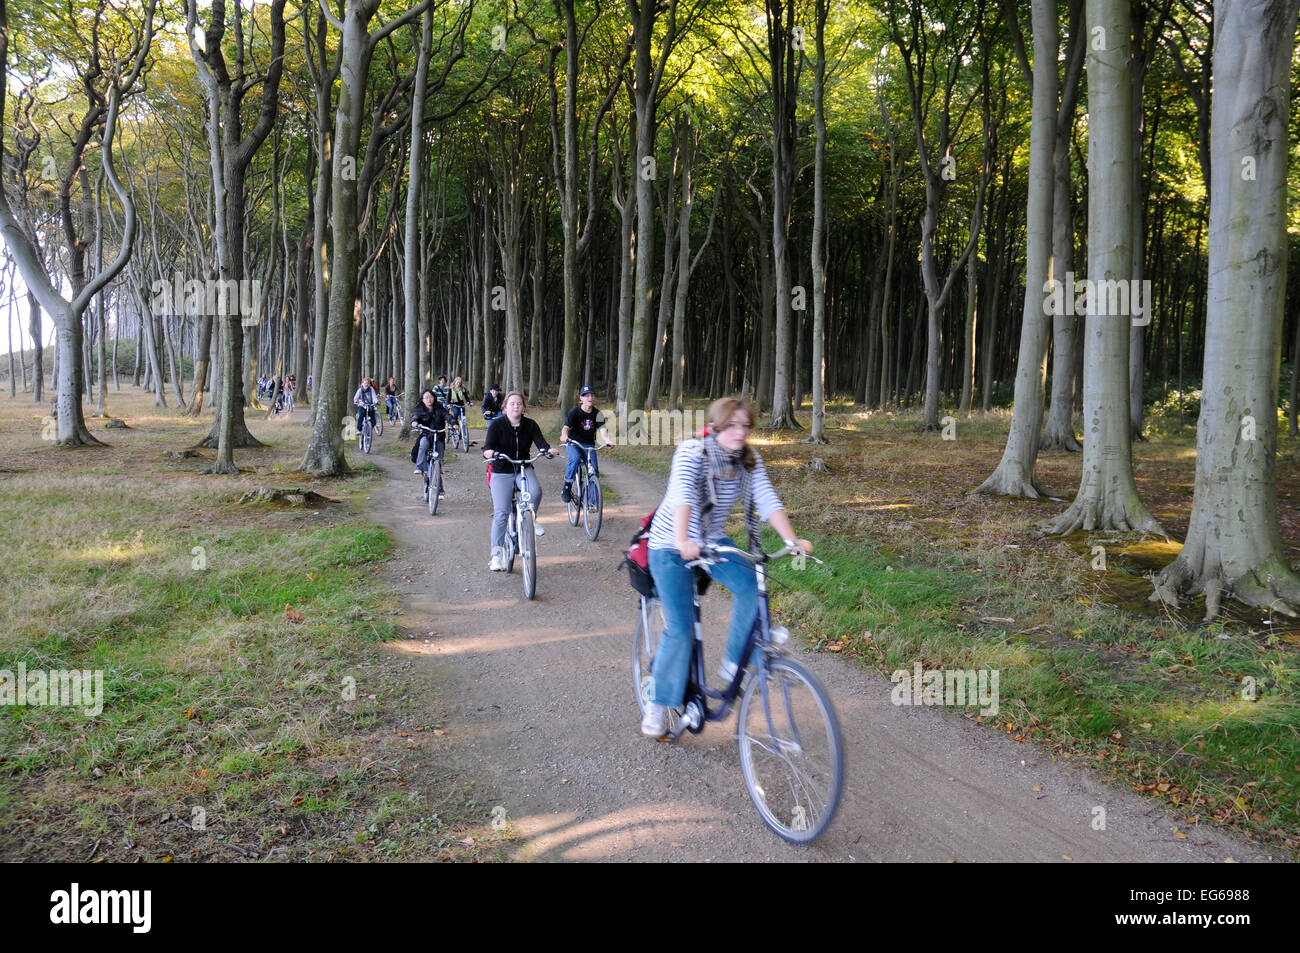 Beech forest, mind wood, ghost wood, with bicyclists  at the baltic sea at nienhagen, Mecklenburg-Western Pomerania, germany Stock Photo